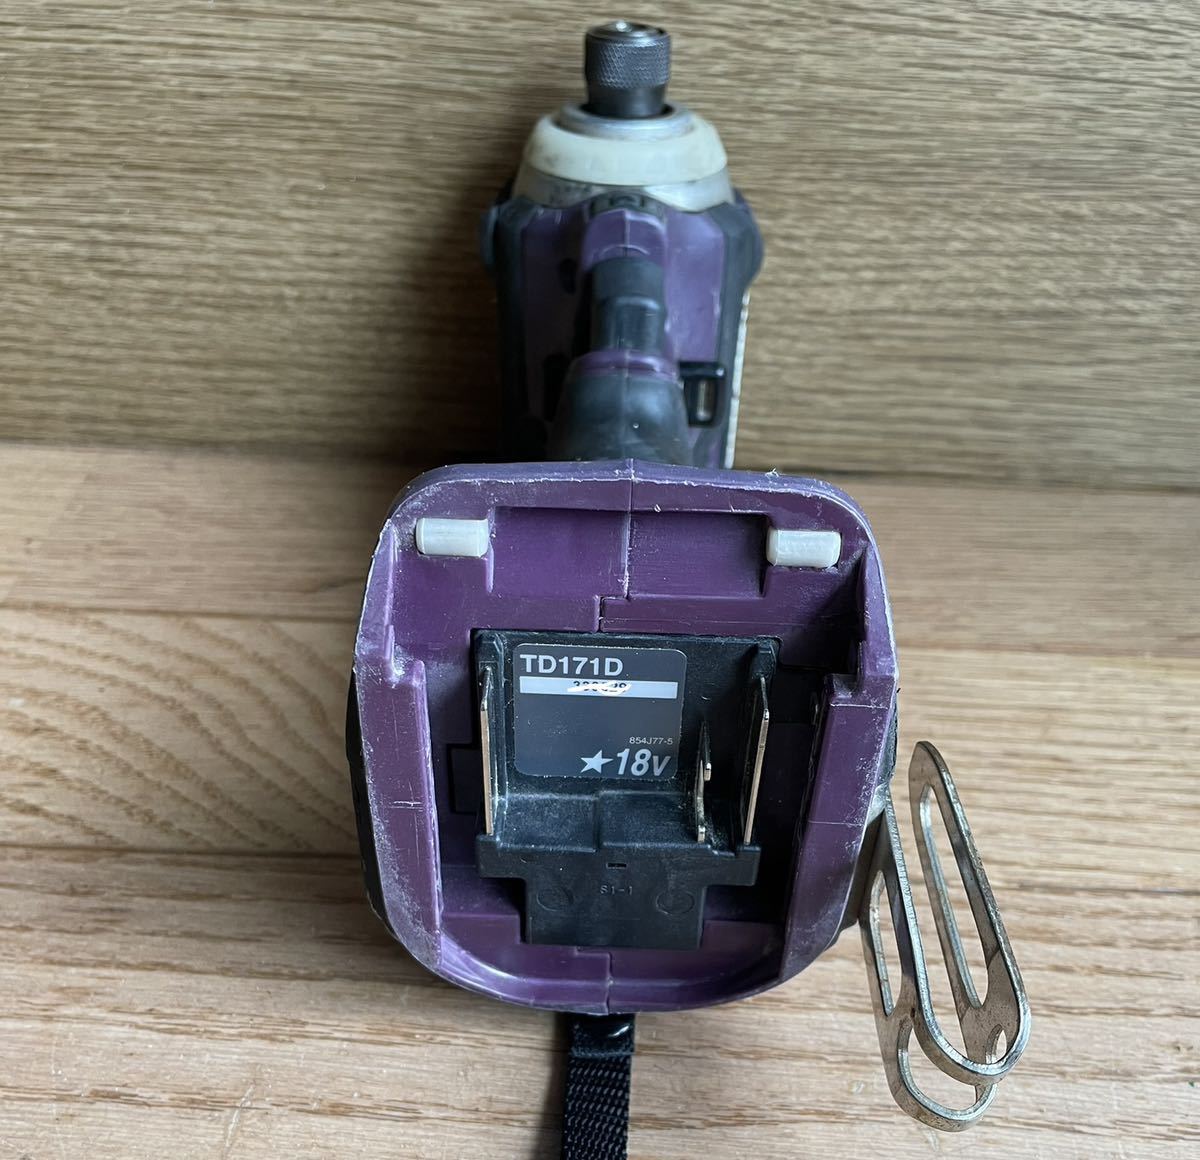  Makita rechargeable impact driver 18V TD171D authentic purple makita used body only 